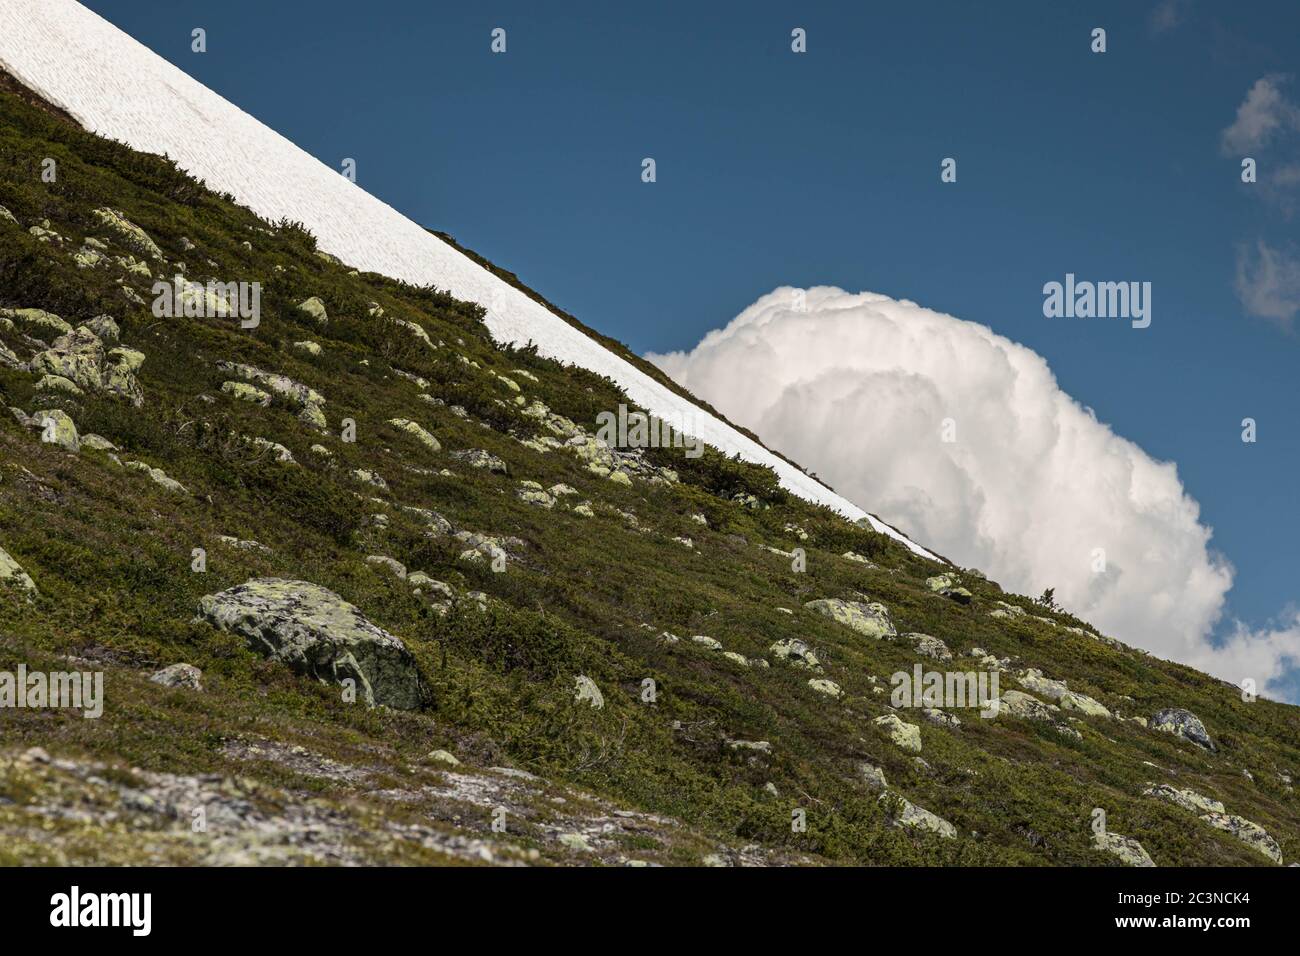 Remains of a glacier, only a small amount of snow left on the mountain side. Stock Photo